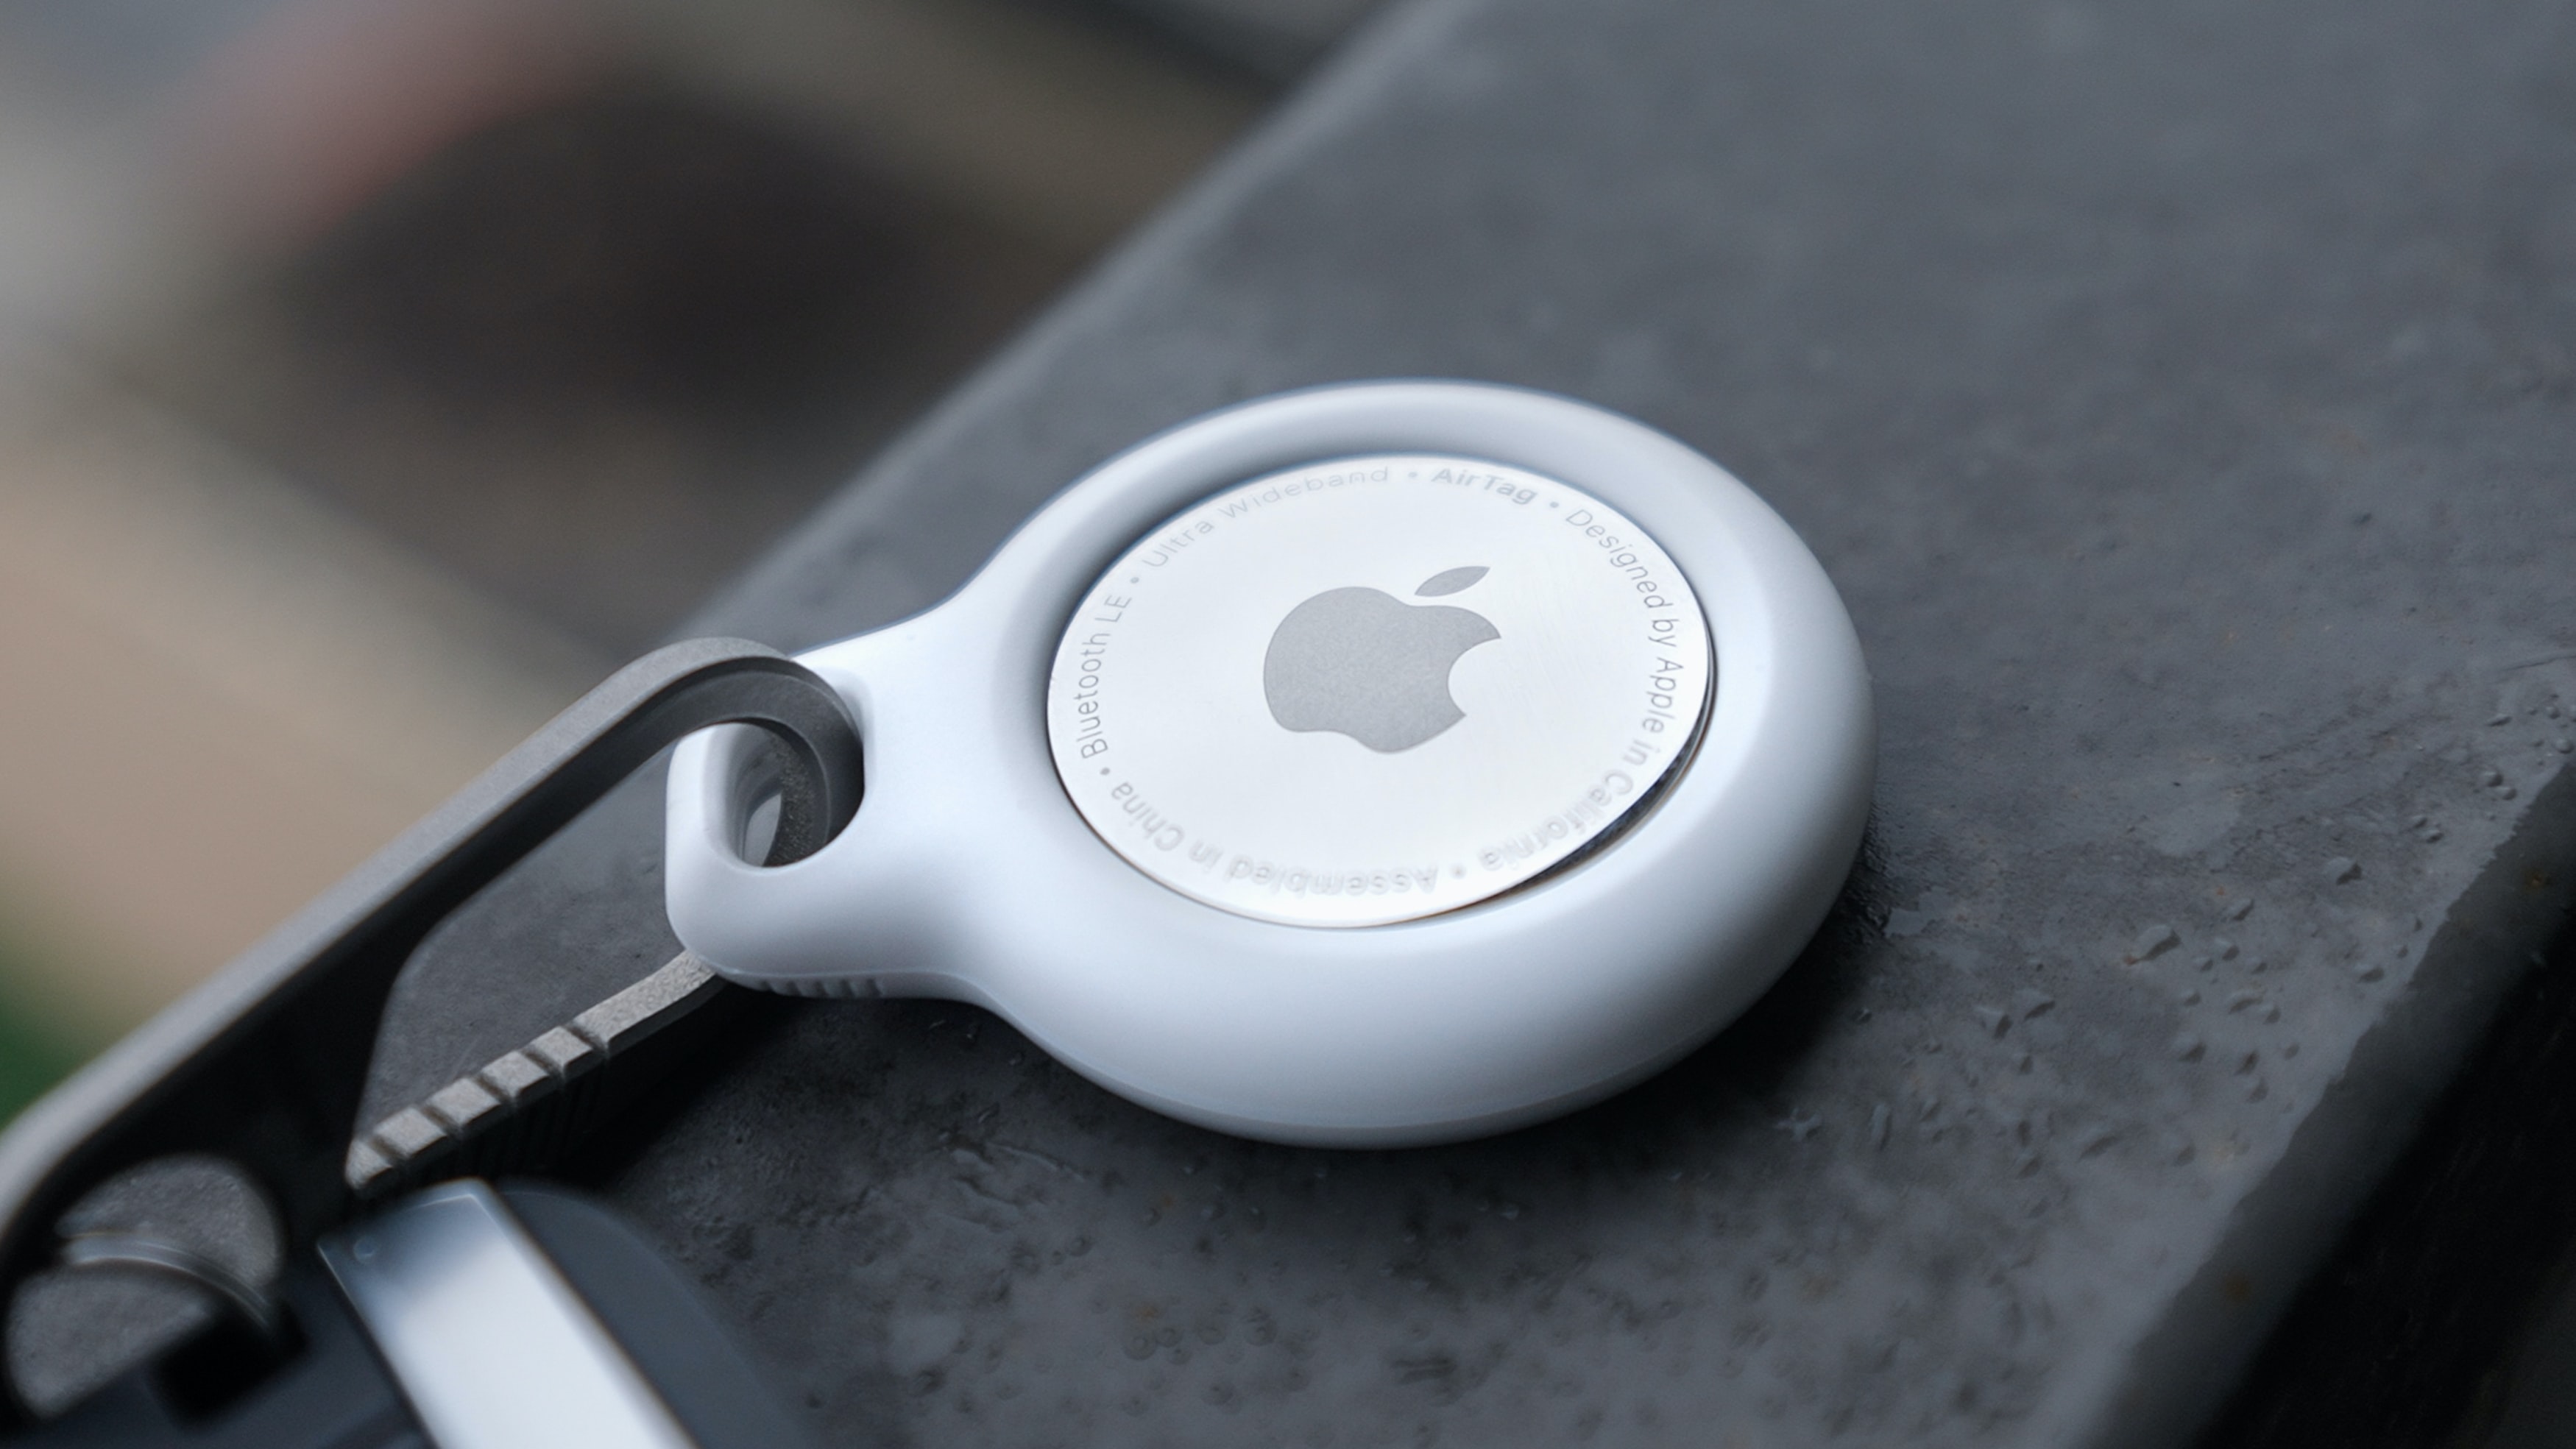 Apple Airtag, Bluetooth Trackers, Electronics